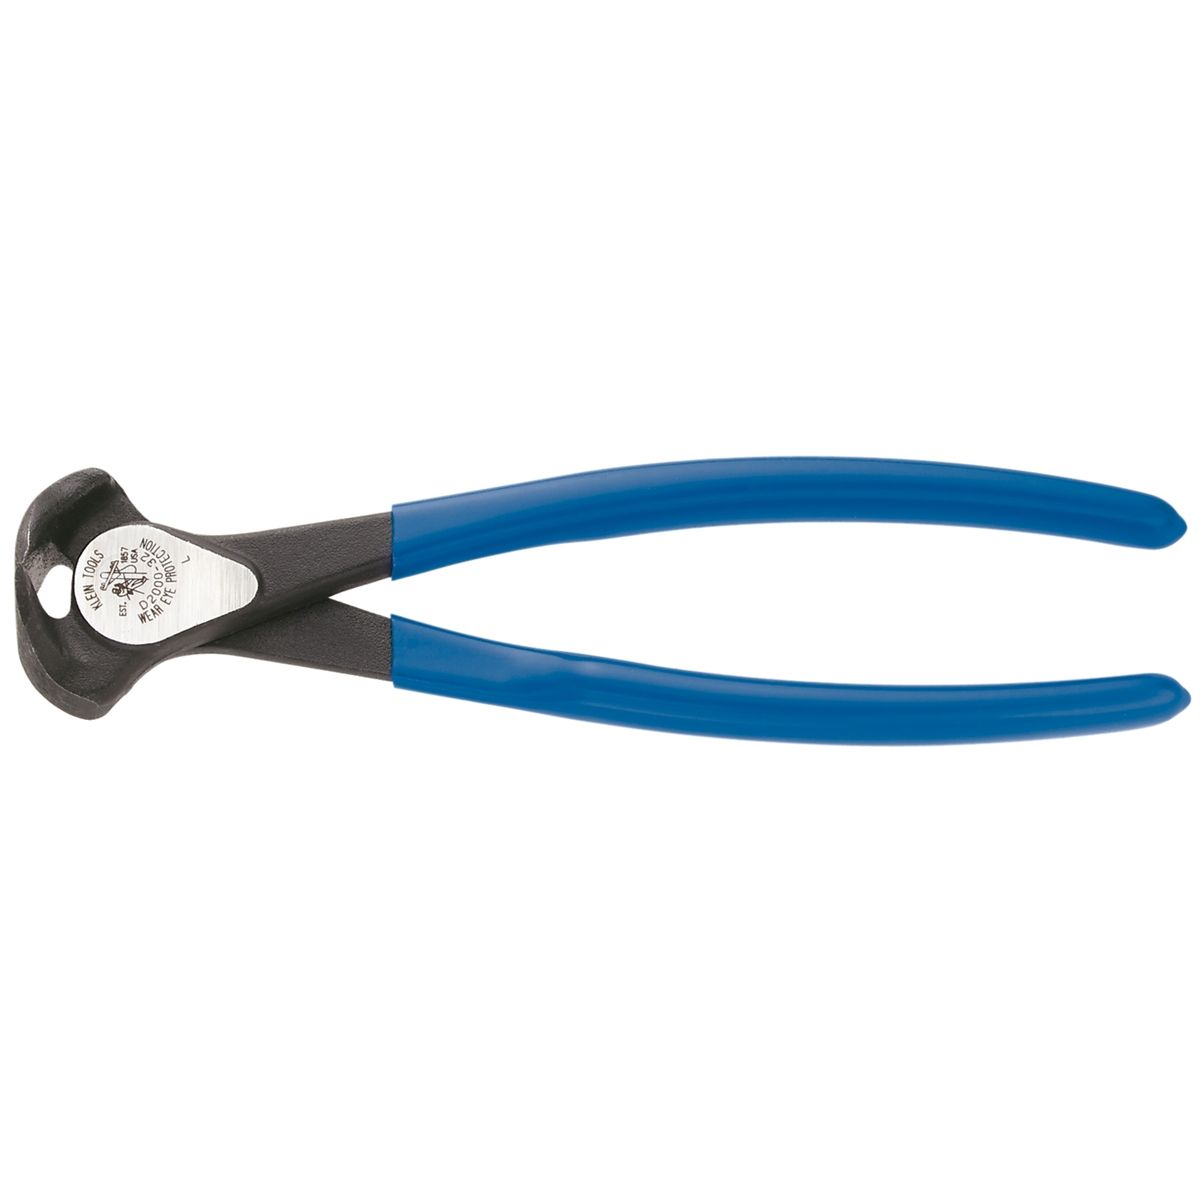 End-Cutting Pliers 2000 Series - 8 In